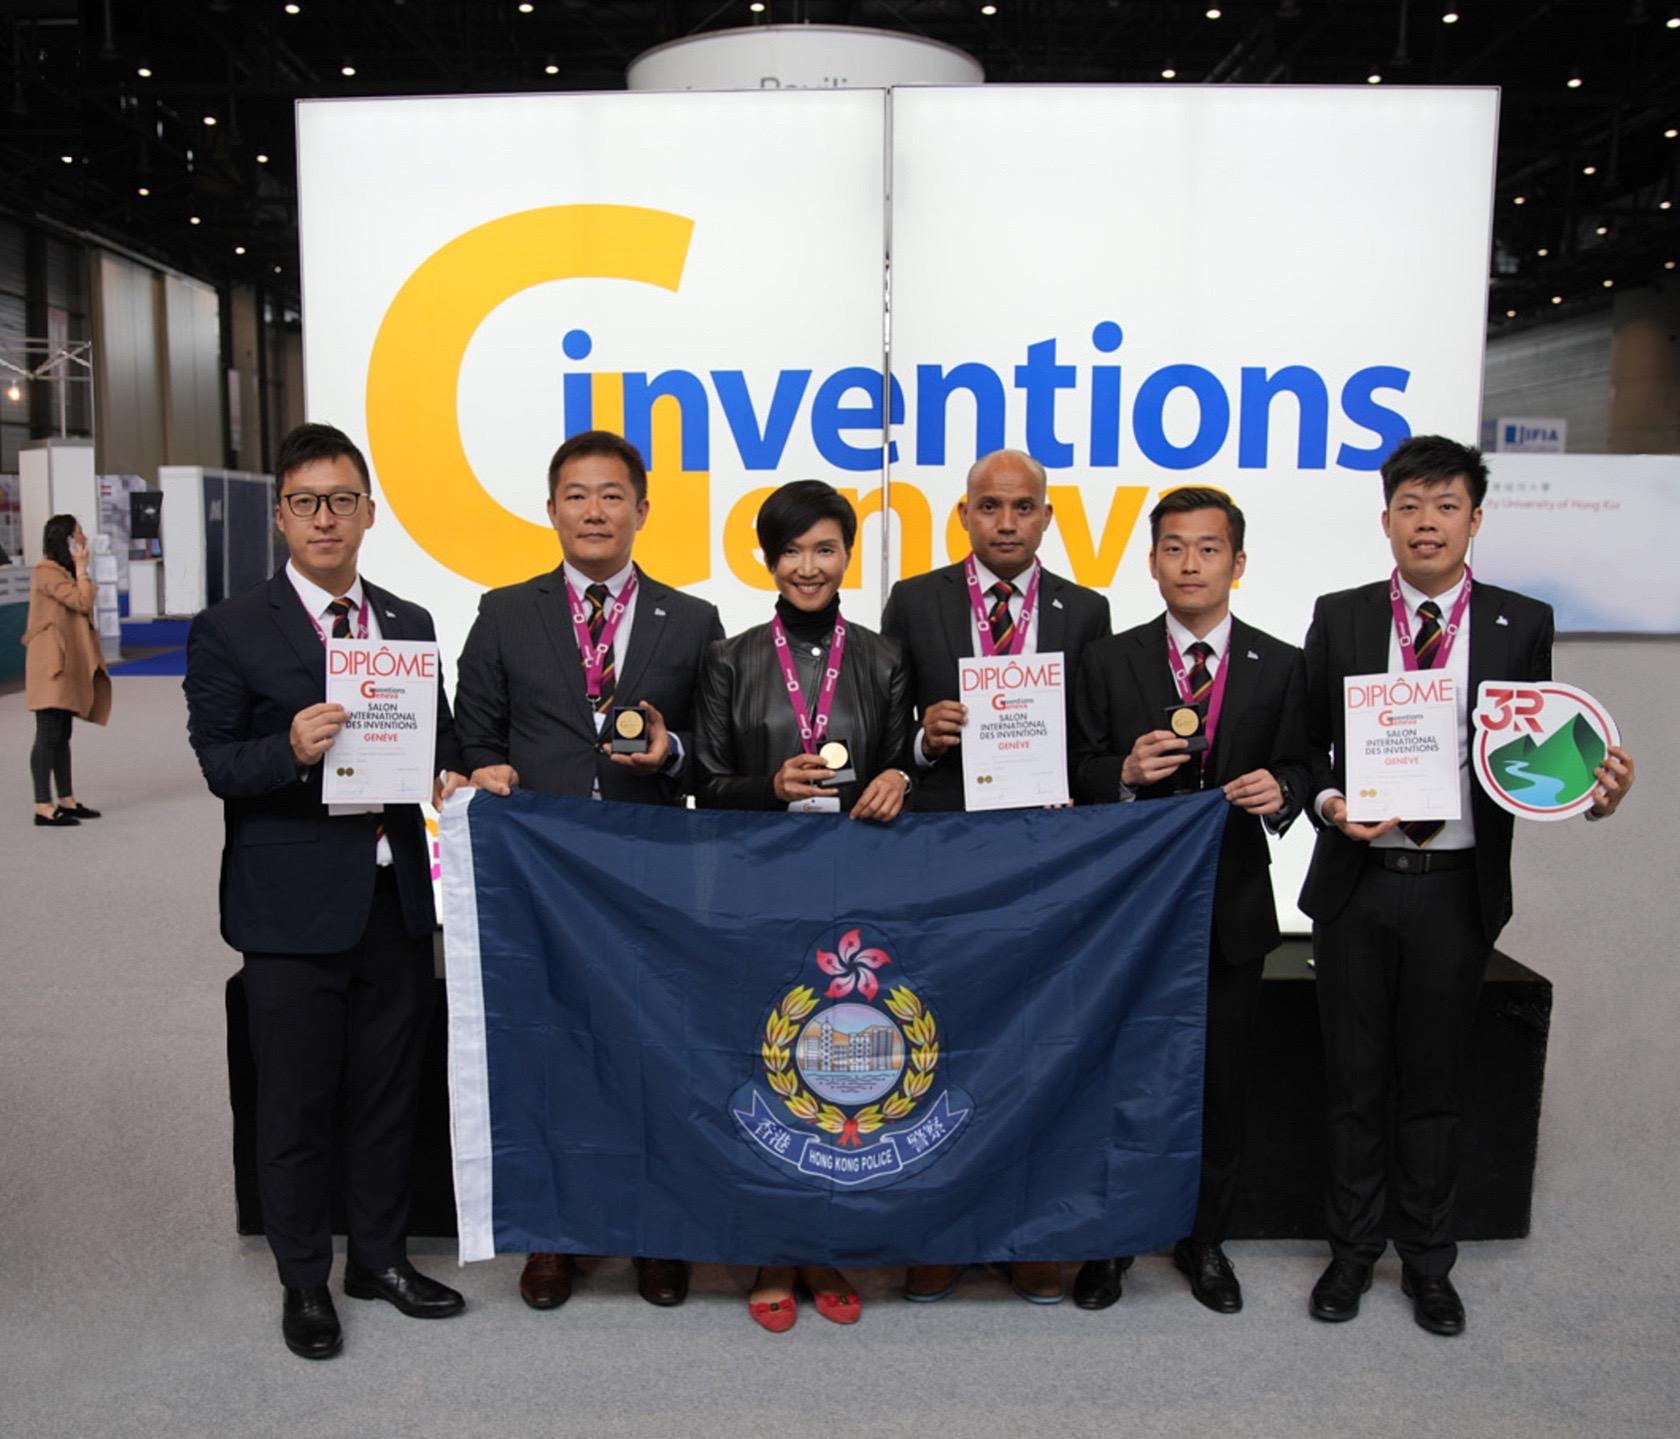 Officers of the Information System Wing of the Hong Kong Police Force participated in the 48th International Exhibition of Inventions of Geneva in Switzerland from April 26 to 30 and garnered three Gold Medals with the Congratulations of Jury.